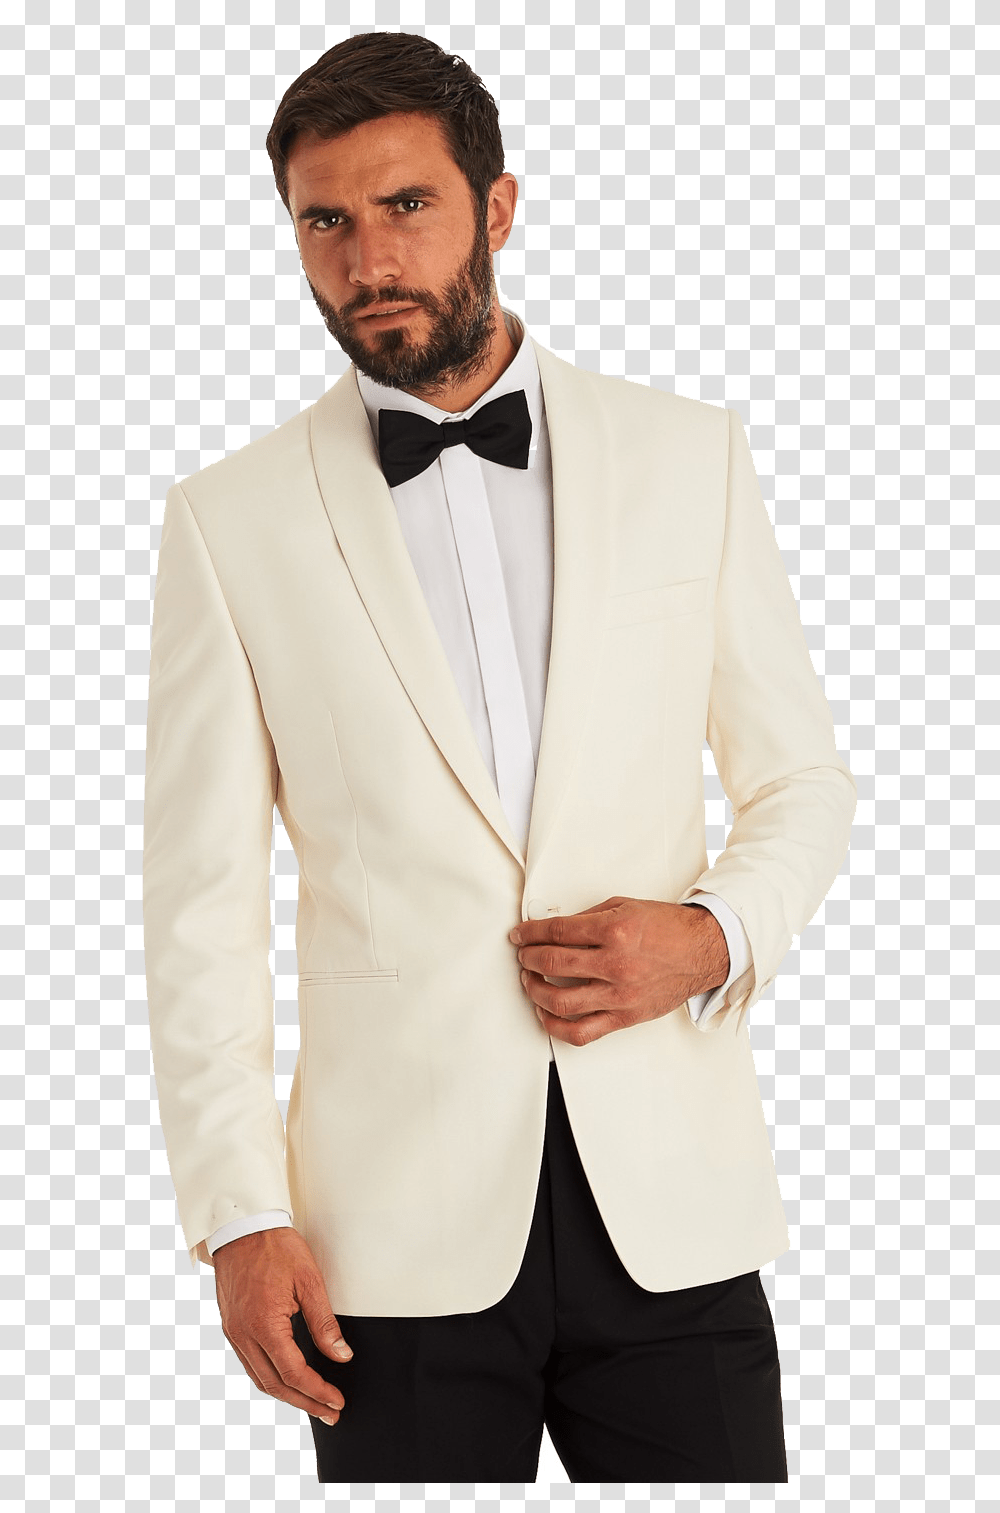 White Tuxedo Image Download White Suit With Bow Tie, Apparel, Overcoat, Shirt Transparent Png